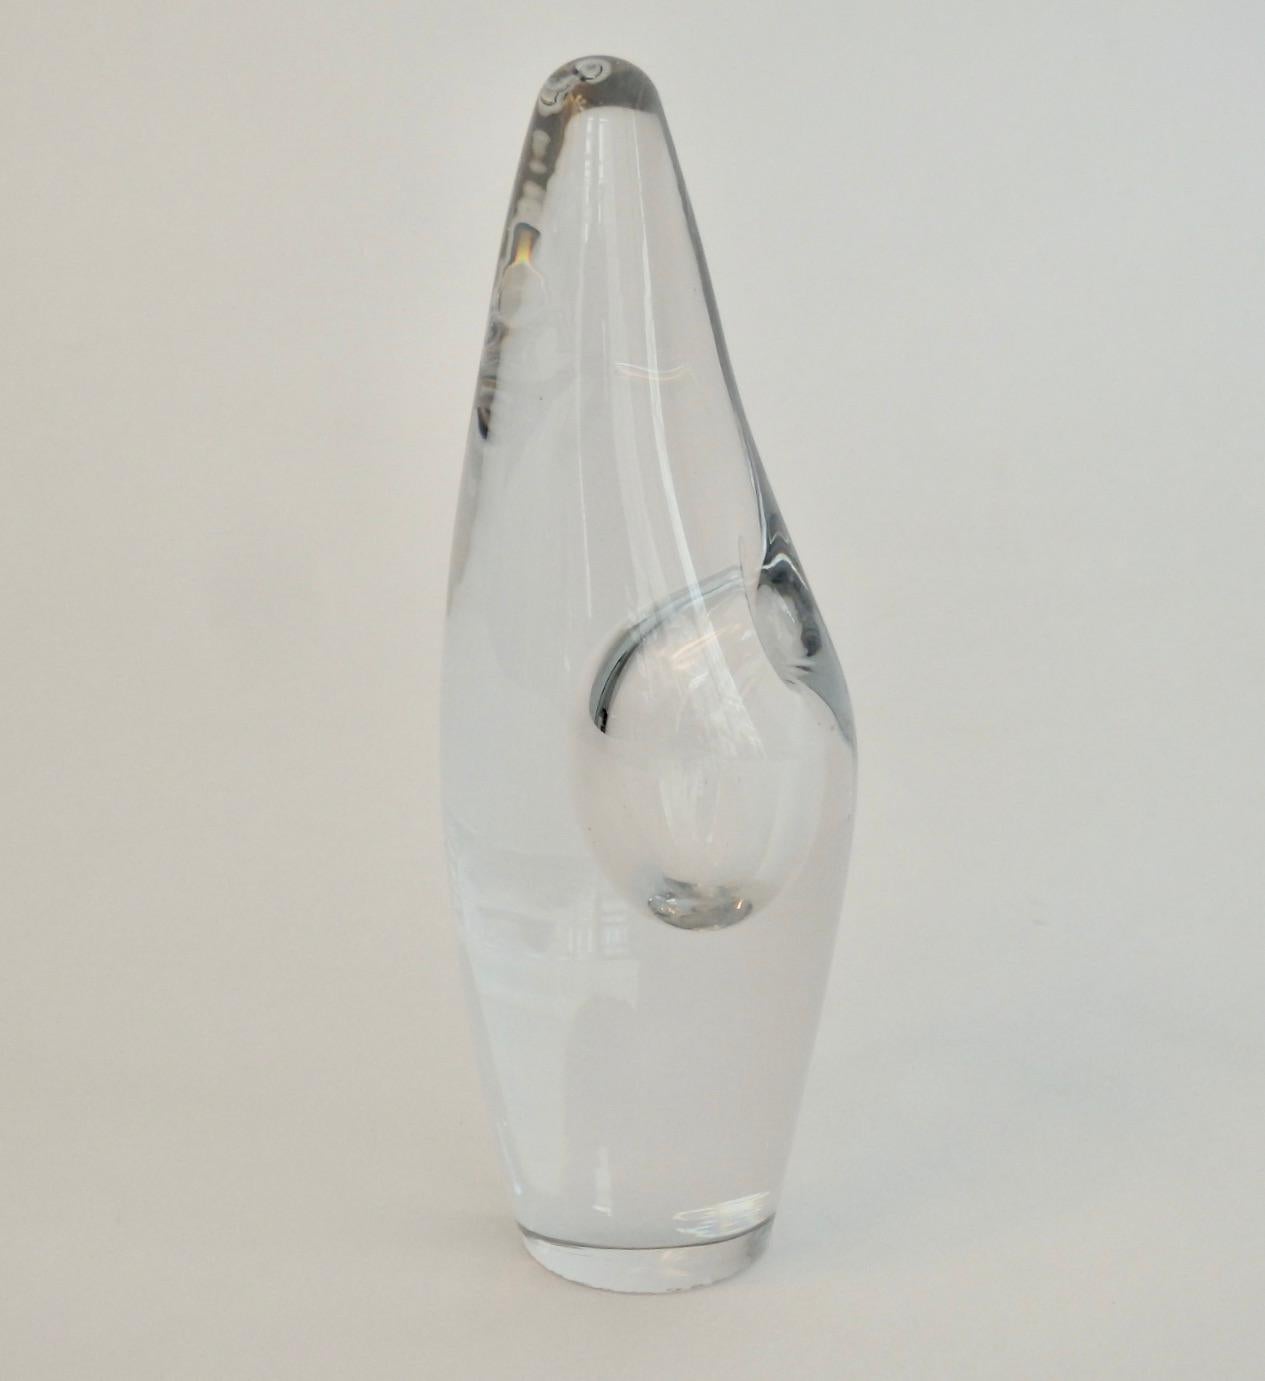 Timo Sarpeneva for Littala Orkidea or Orchid Sculptural Bud Vase In Good Condition For Sale In Ferndale, MI